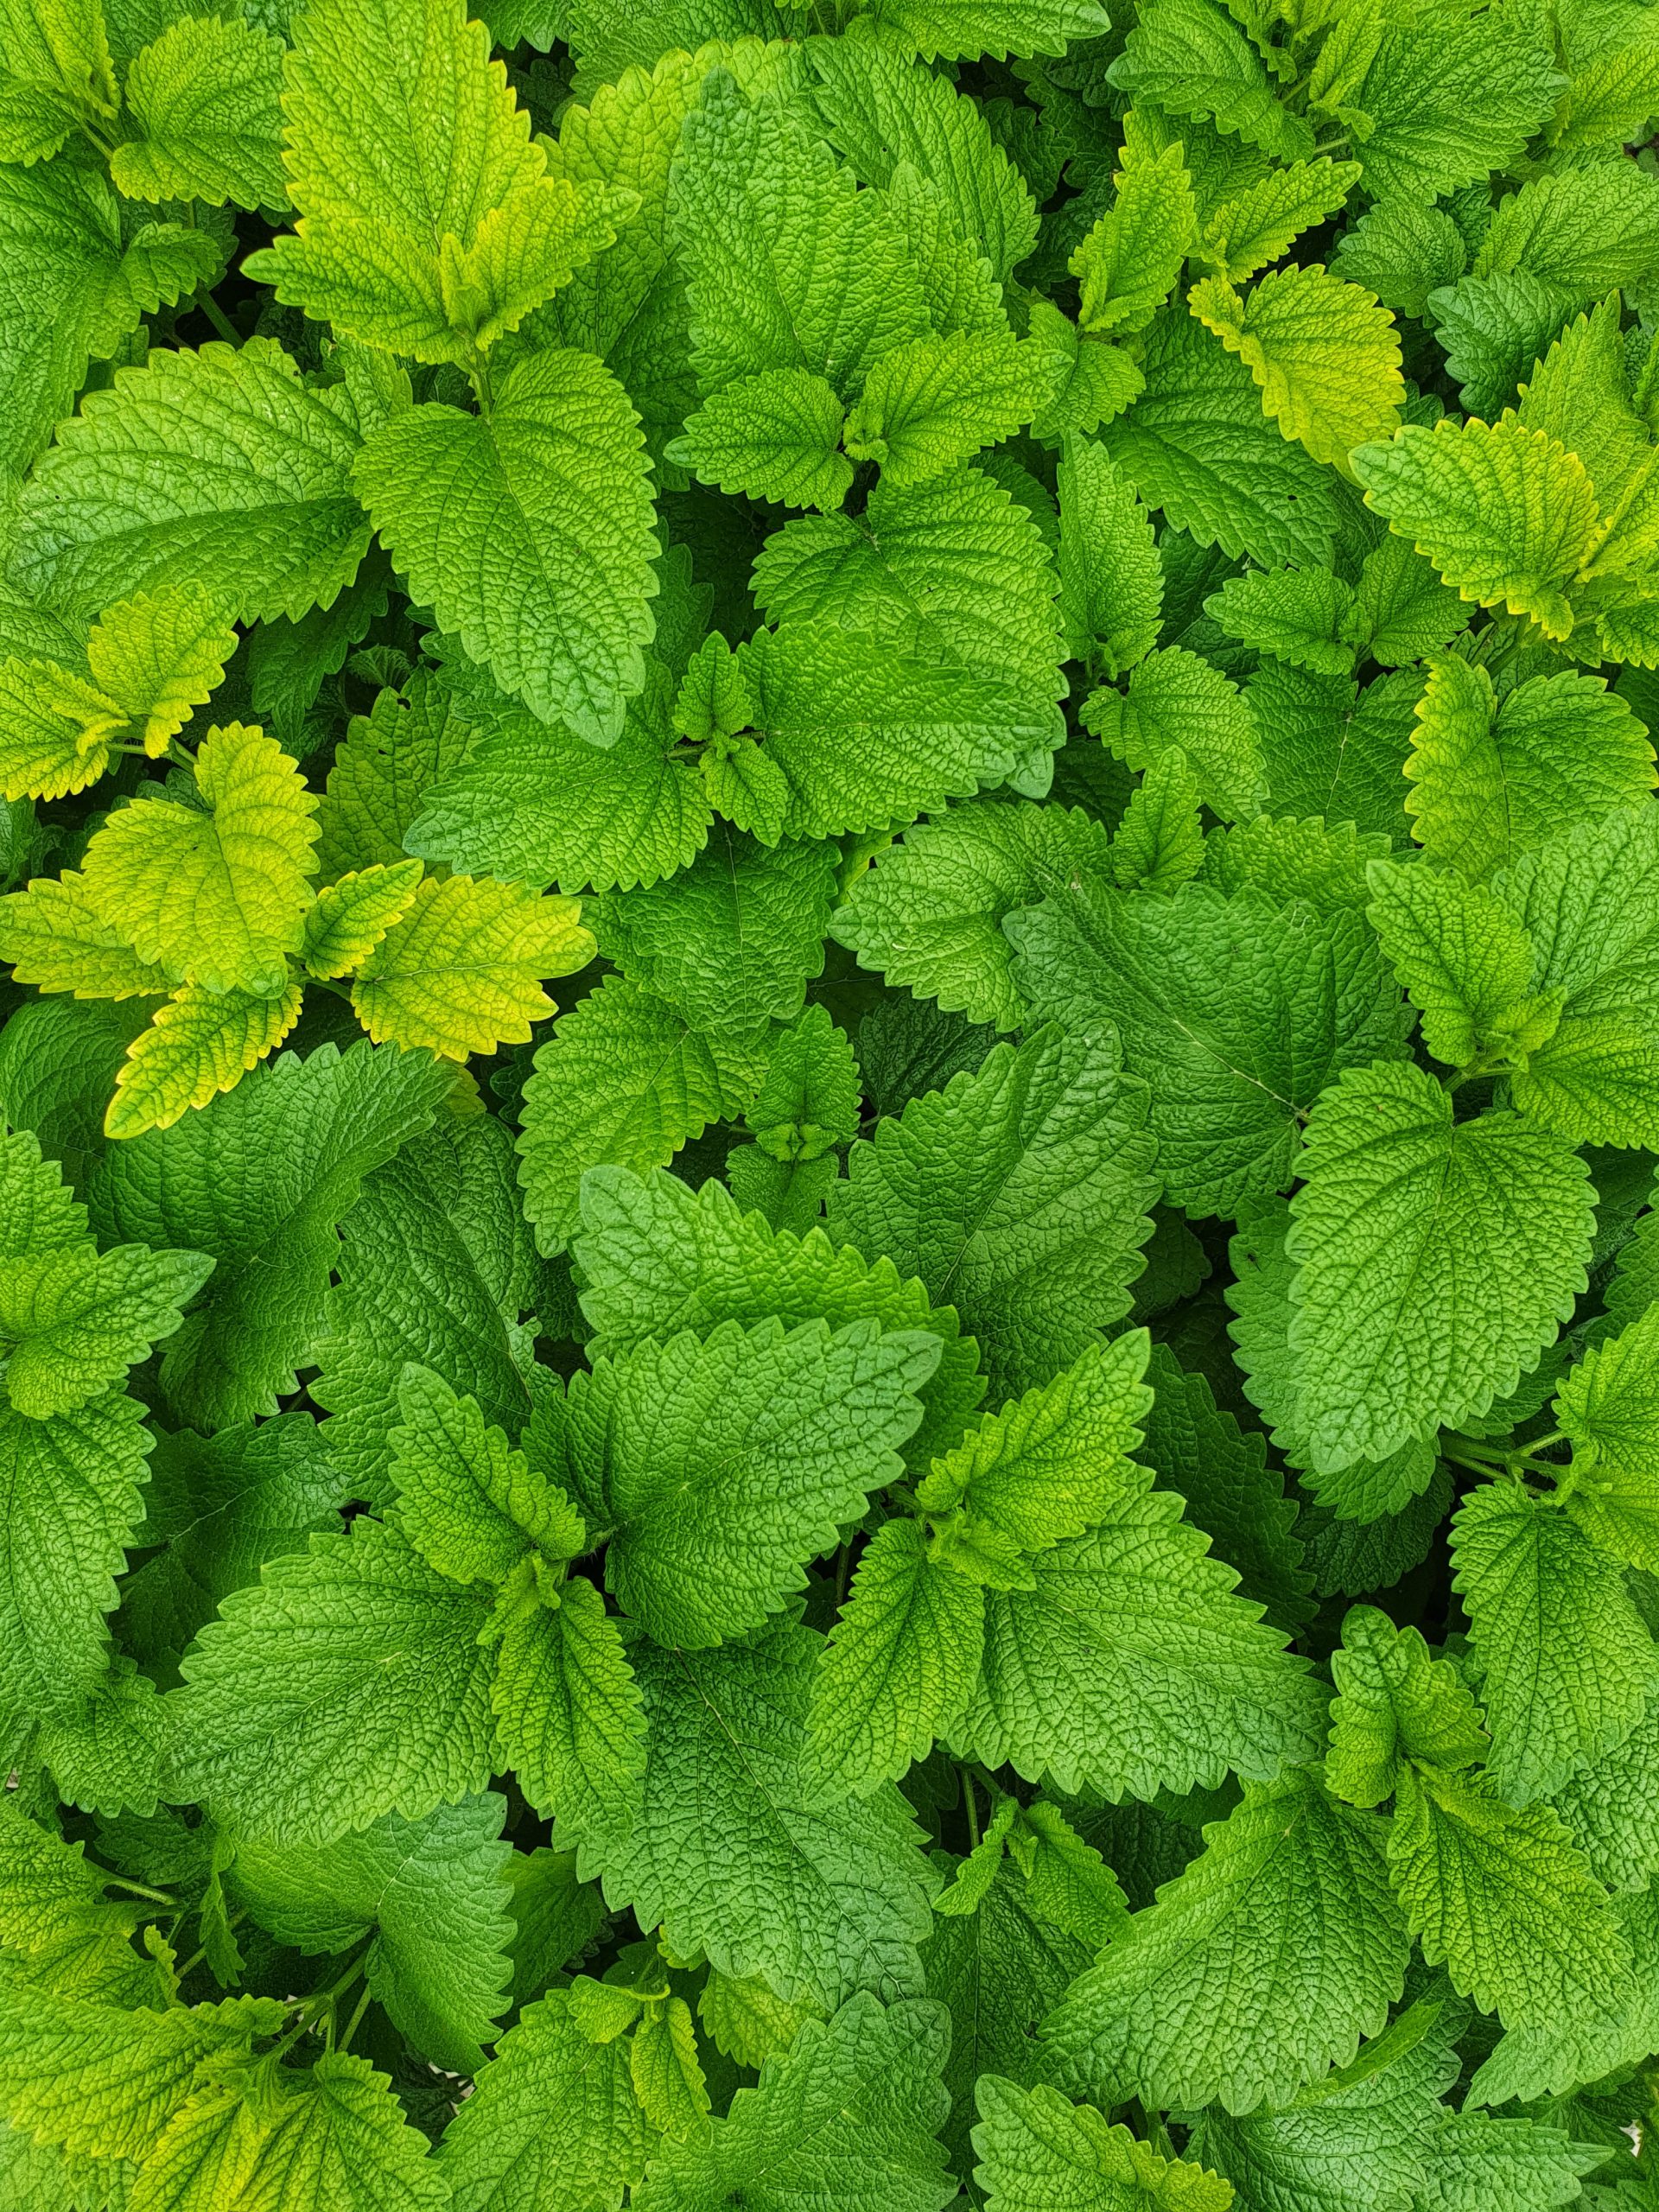 Catnip Vs Mint: What Is The Difference?